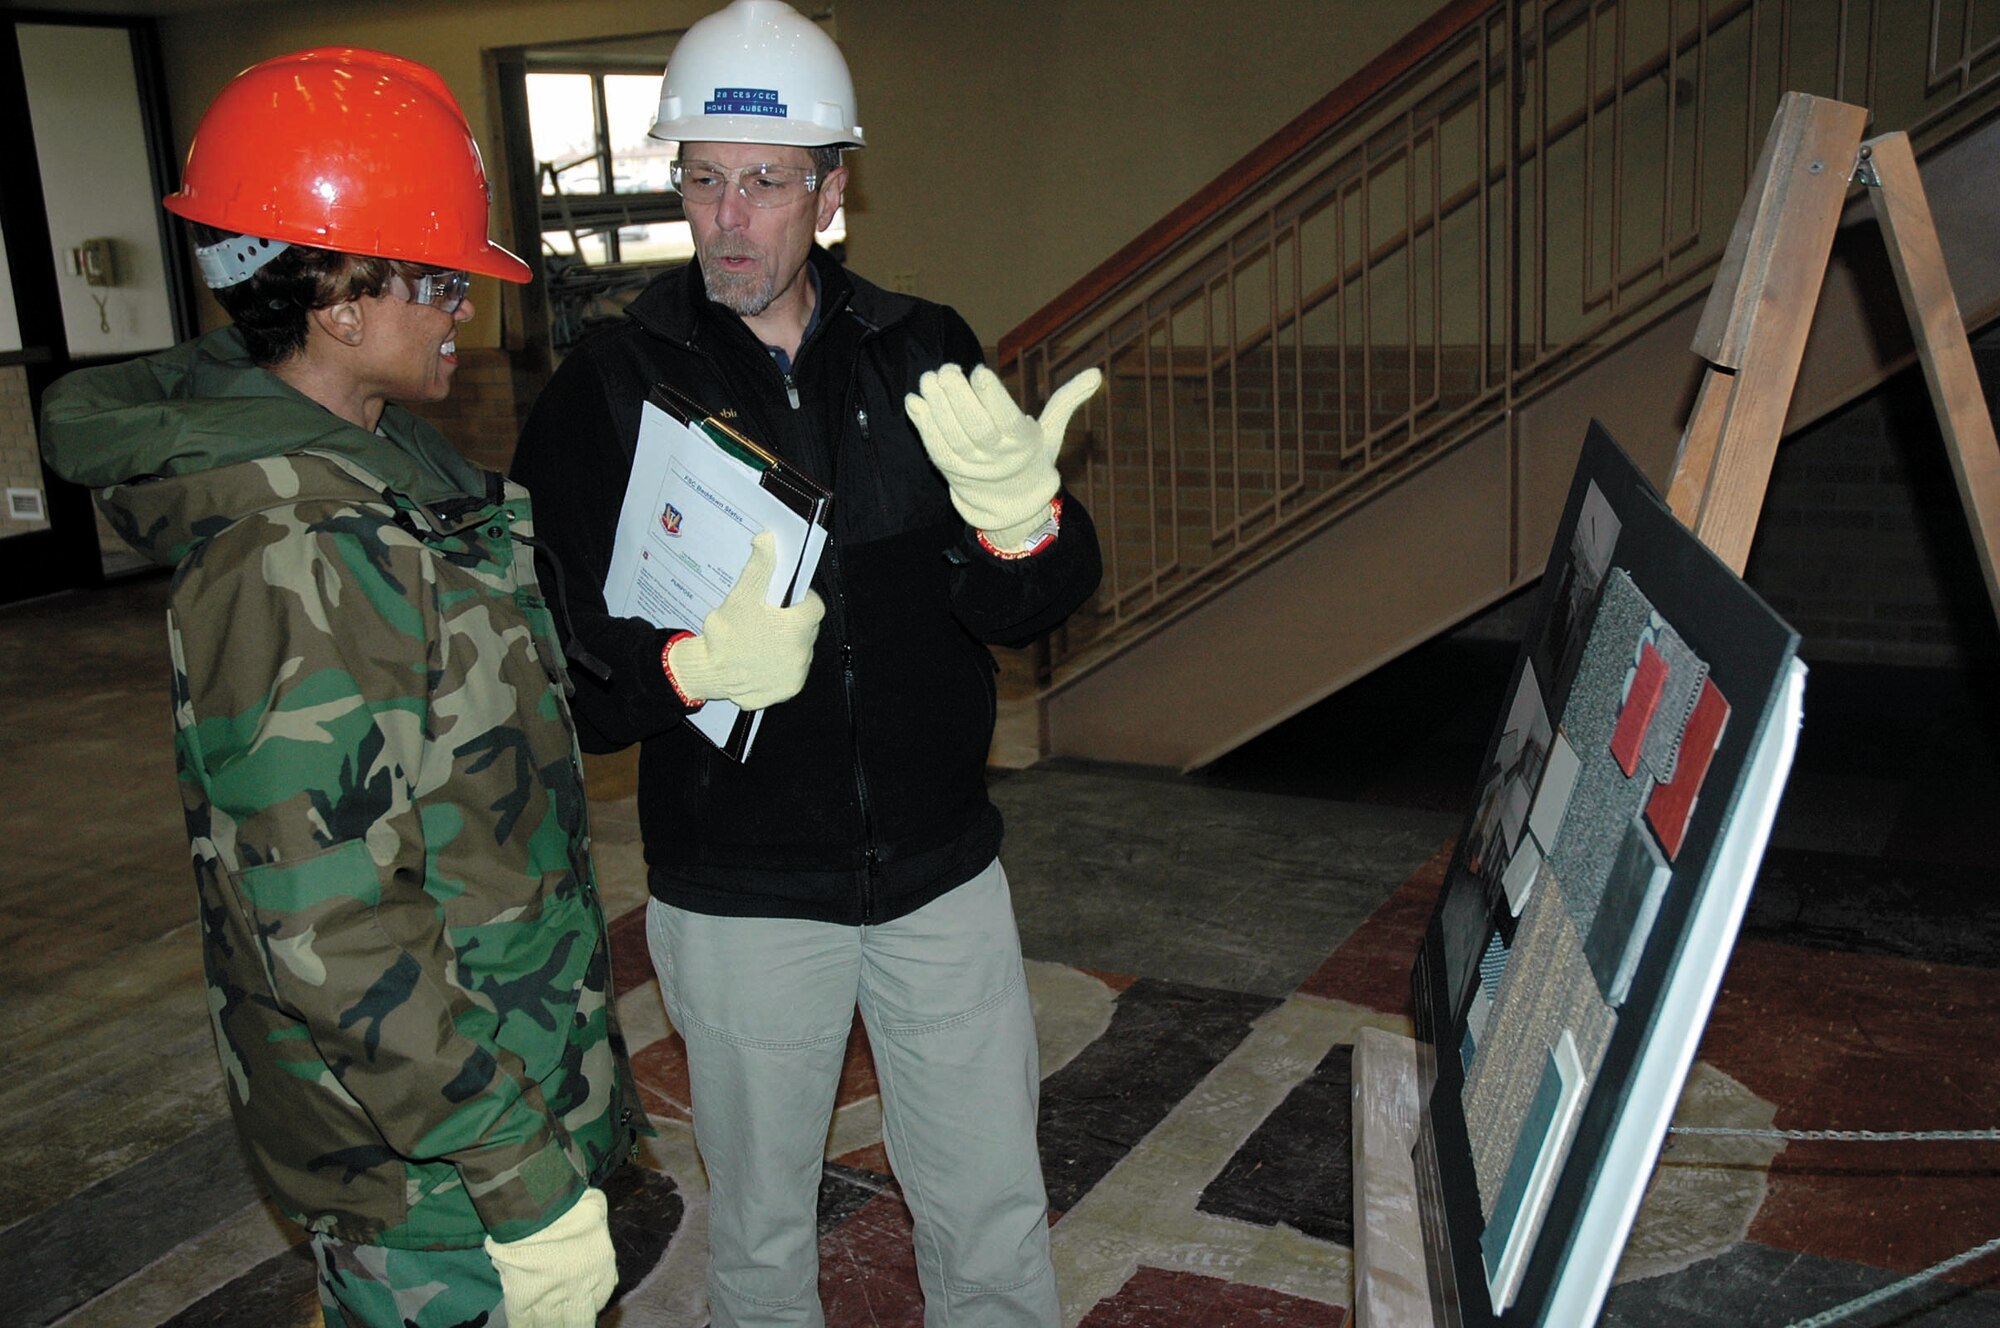 Howie Aubertin, 28th Civil Engineering Squadron engineering flight chief, briefs Col. Renita Alexander, 28th Mission Support Group commander, on the progress of the education center transforming to the new Air Force Financial Services Center. The classes previosuly held in the education center have been dispersed across the squadrons at Ellsworth, the Rushmore Center and in Douglas High School.